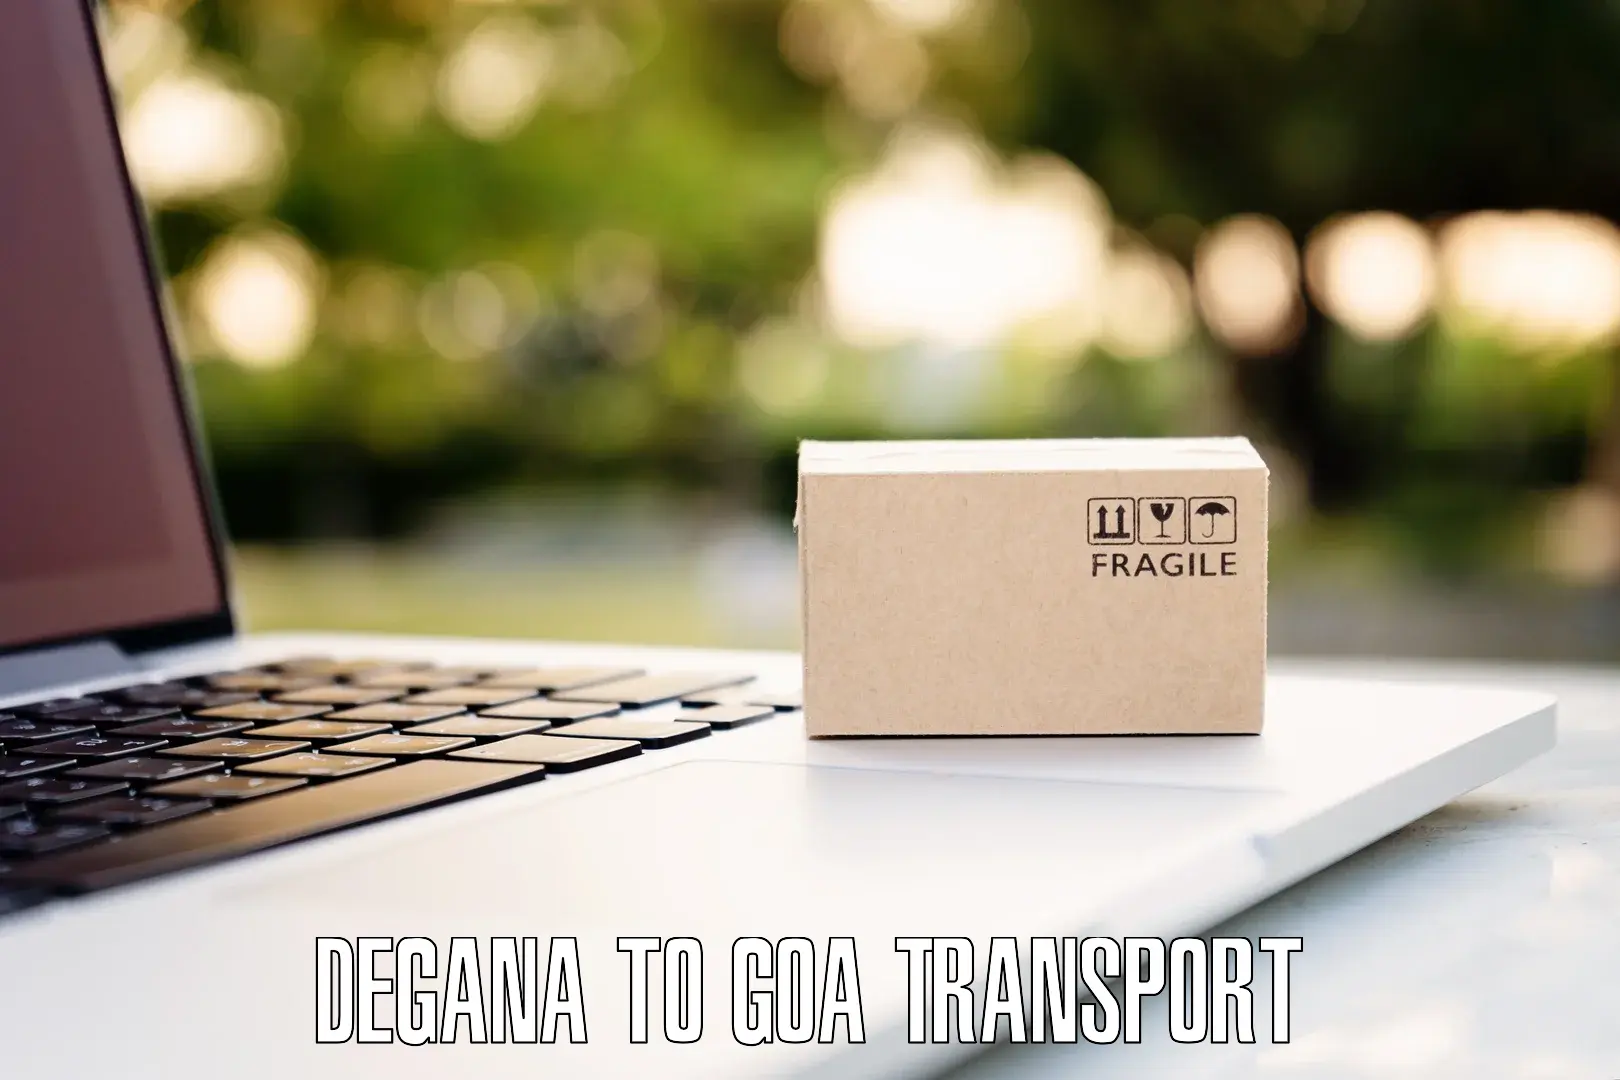 Road transport online services Degana to Goa